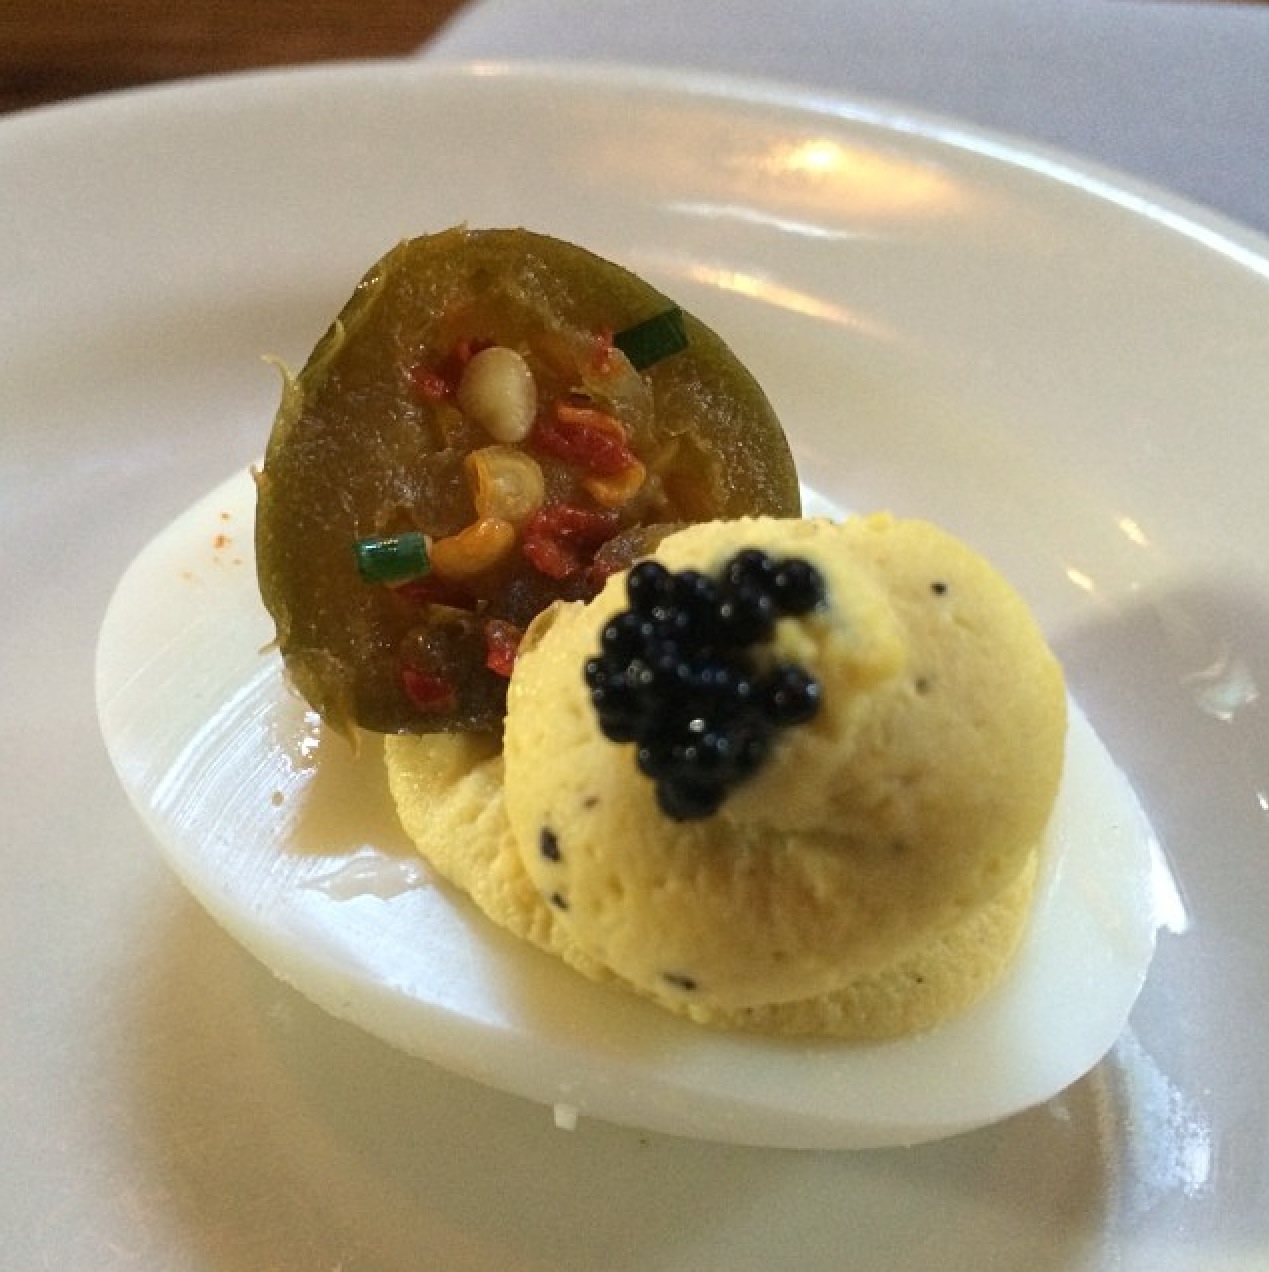 Deviled Egg with Caviar and a perfectly Pickled Jalapeño By @ChefRoble